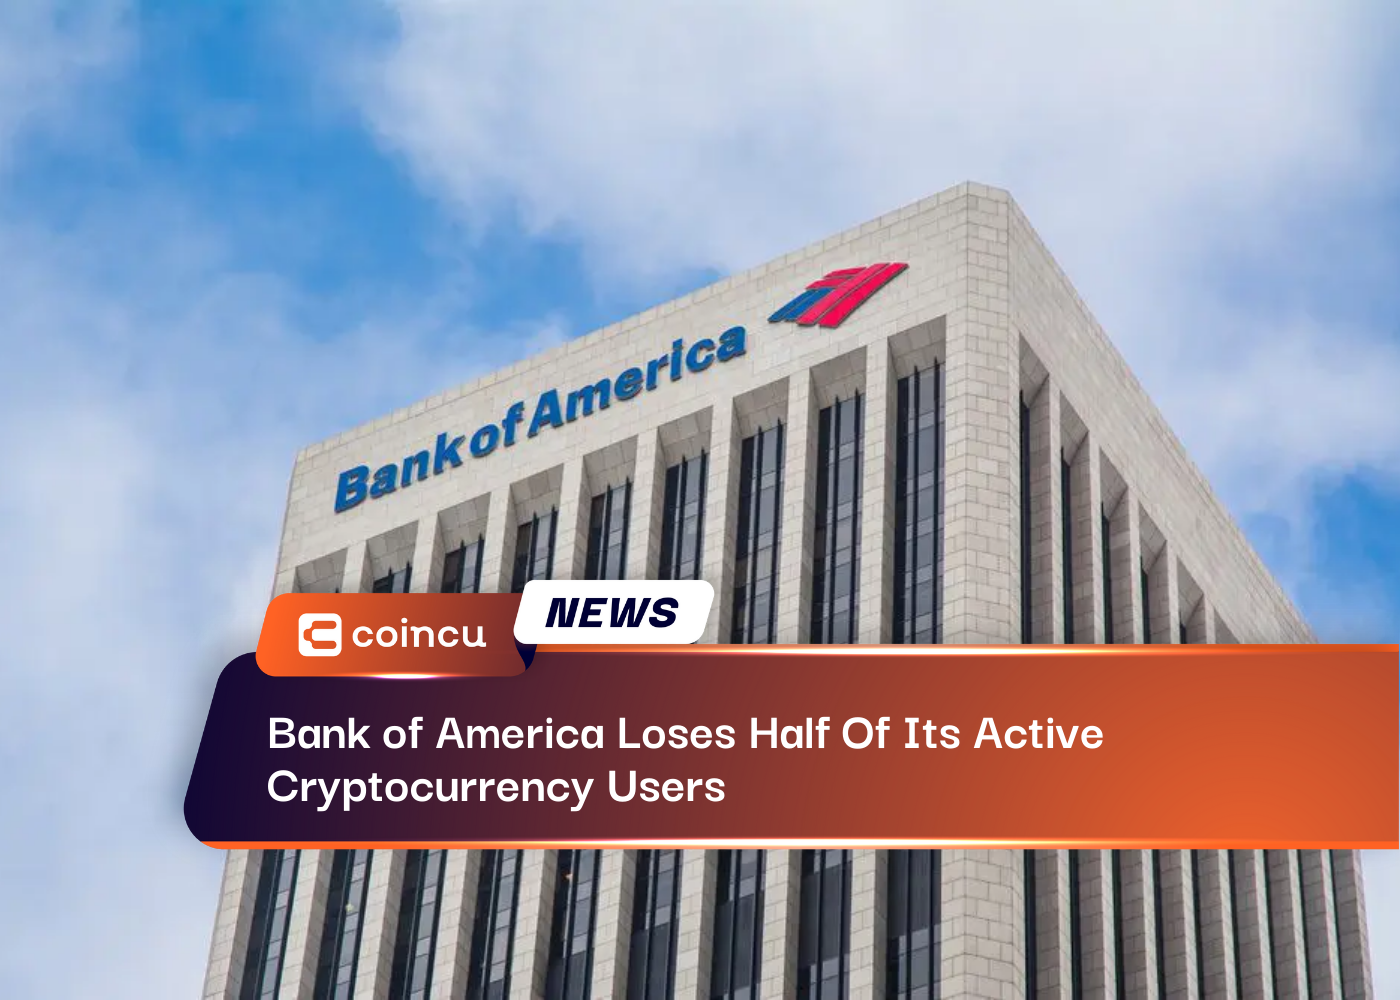 Bank of America Loses Half Of Its Active Cryptocurrency Users